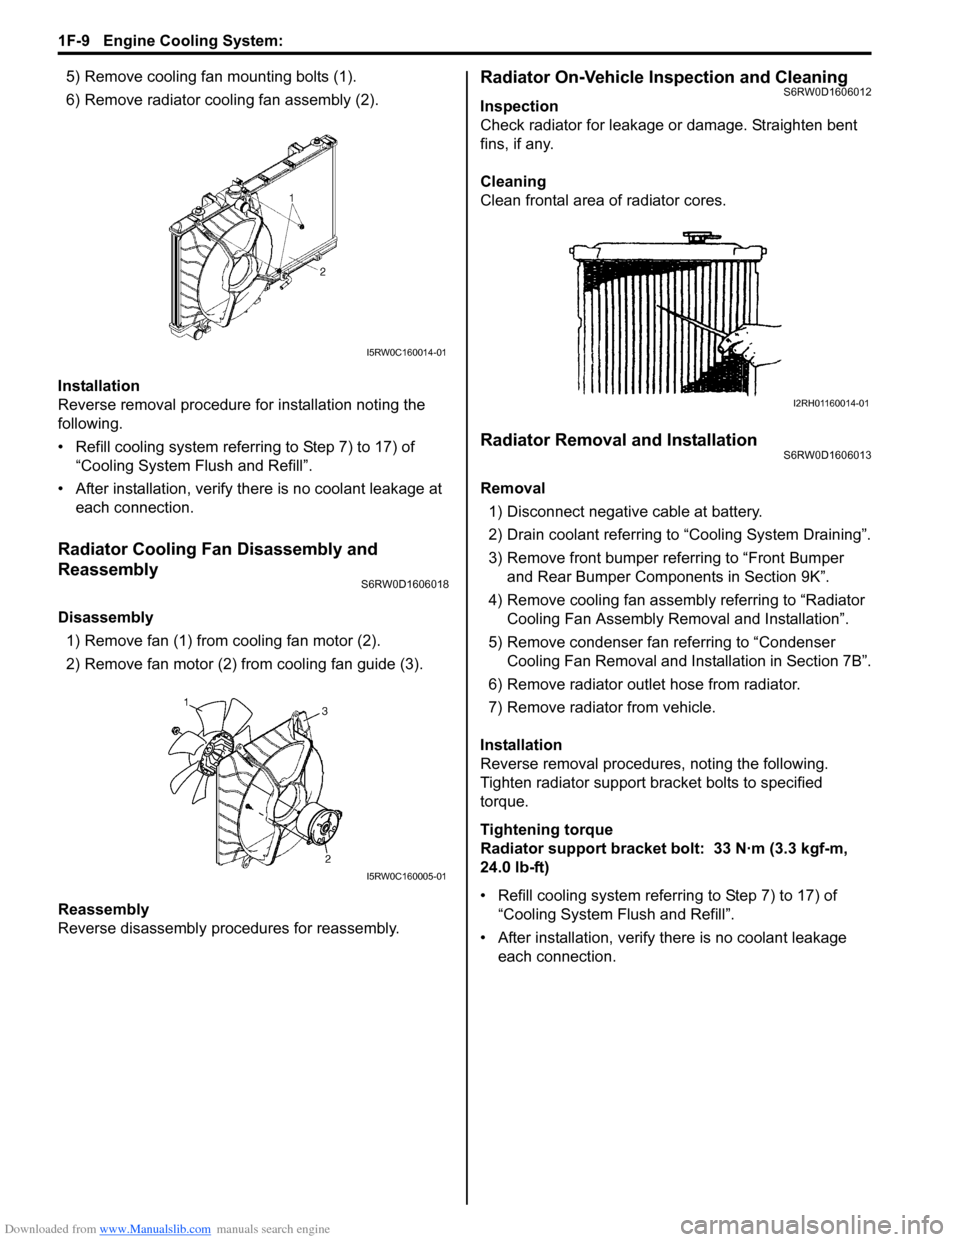 SUZUKI SX4 2006 1.G Service Workshop Manual Downloaded from www.Manualslib.com manuals search engine 1F-9 Engine Cooling System: 
5) Remove cooling fan mounting bolts (1).
6) Remove radiator cooling fan assembly (2).
Installation
Reverse remova